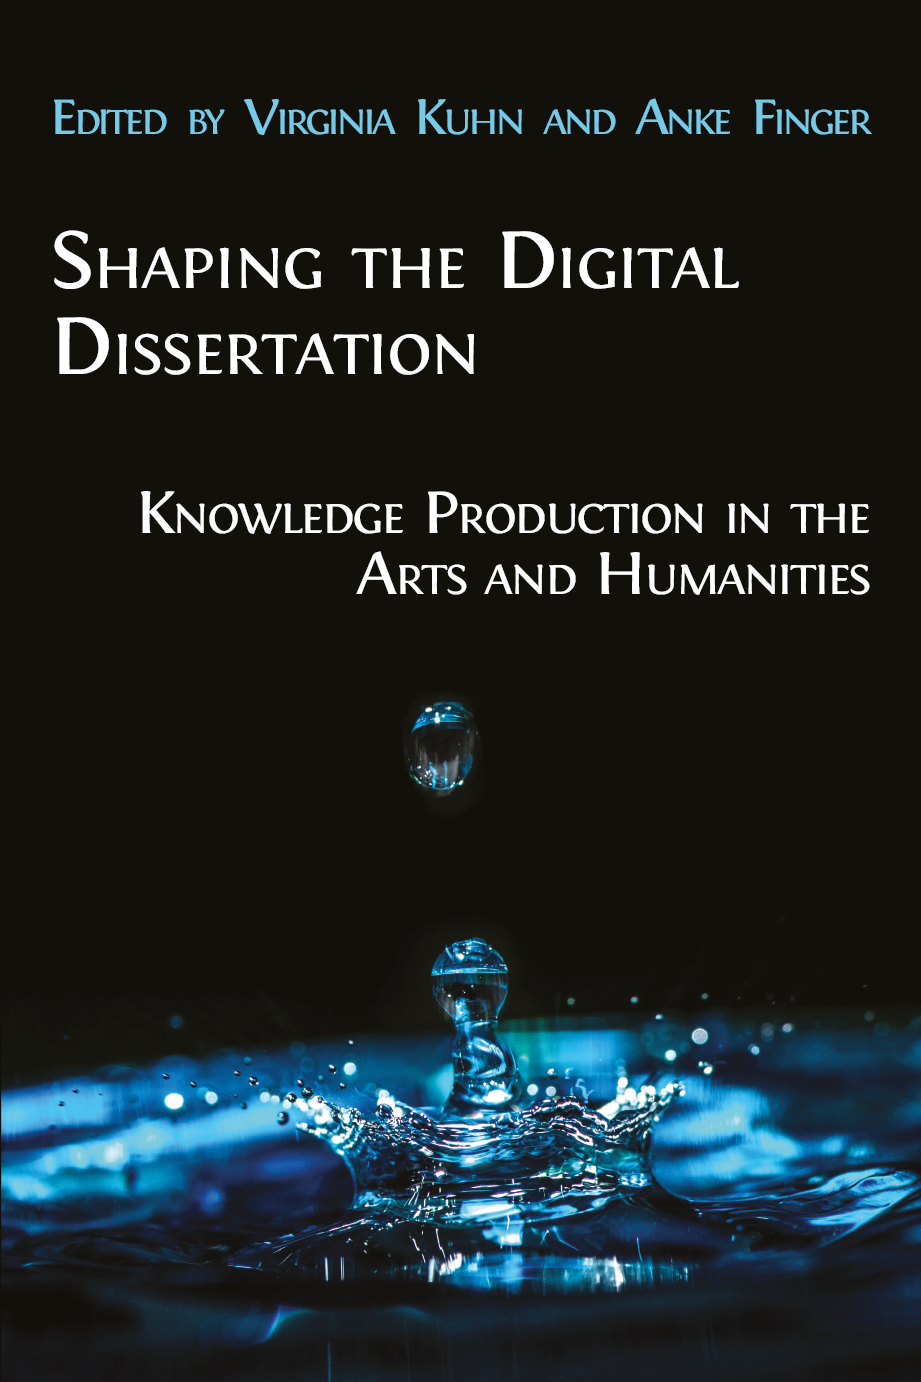 Shaping the Digital Dissertation book cover image